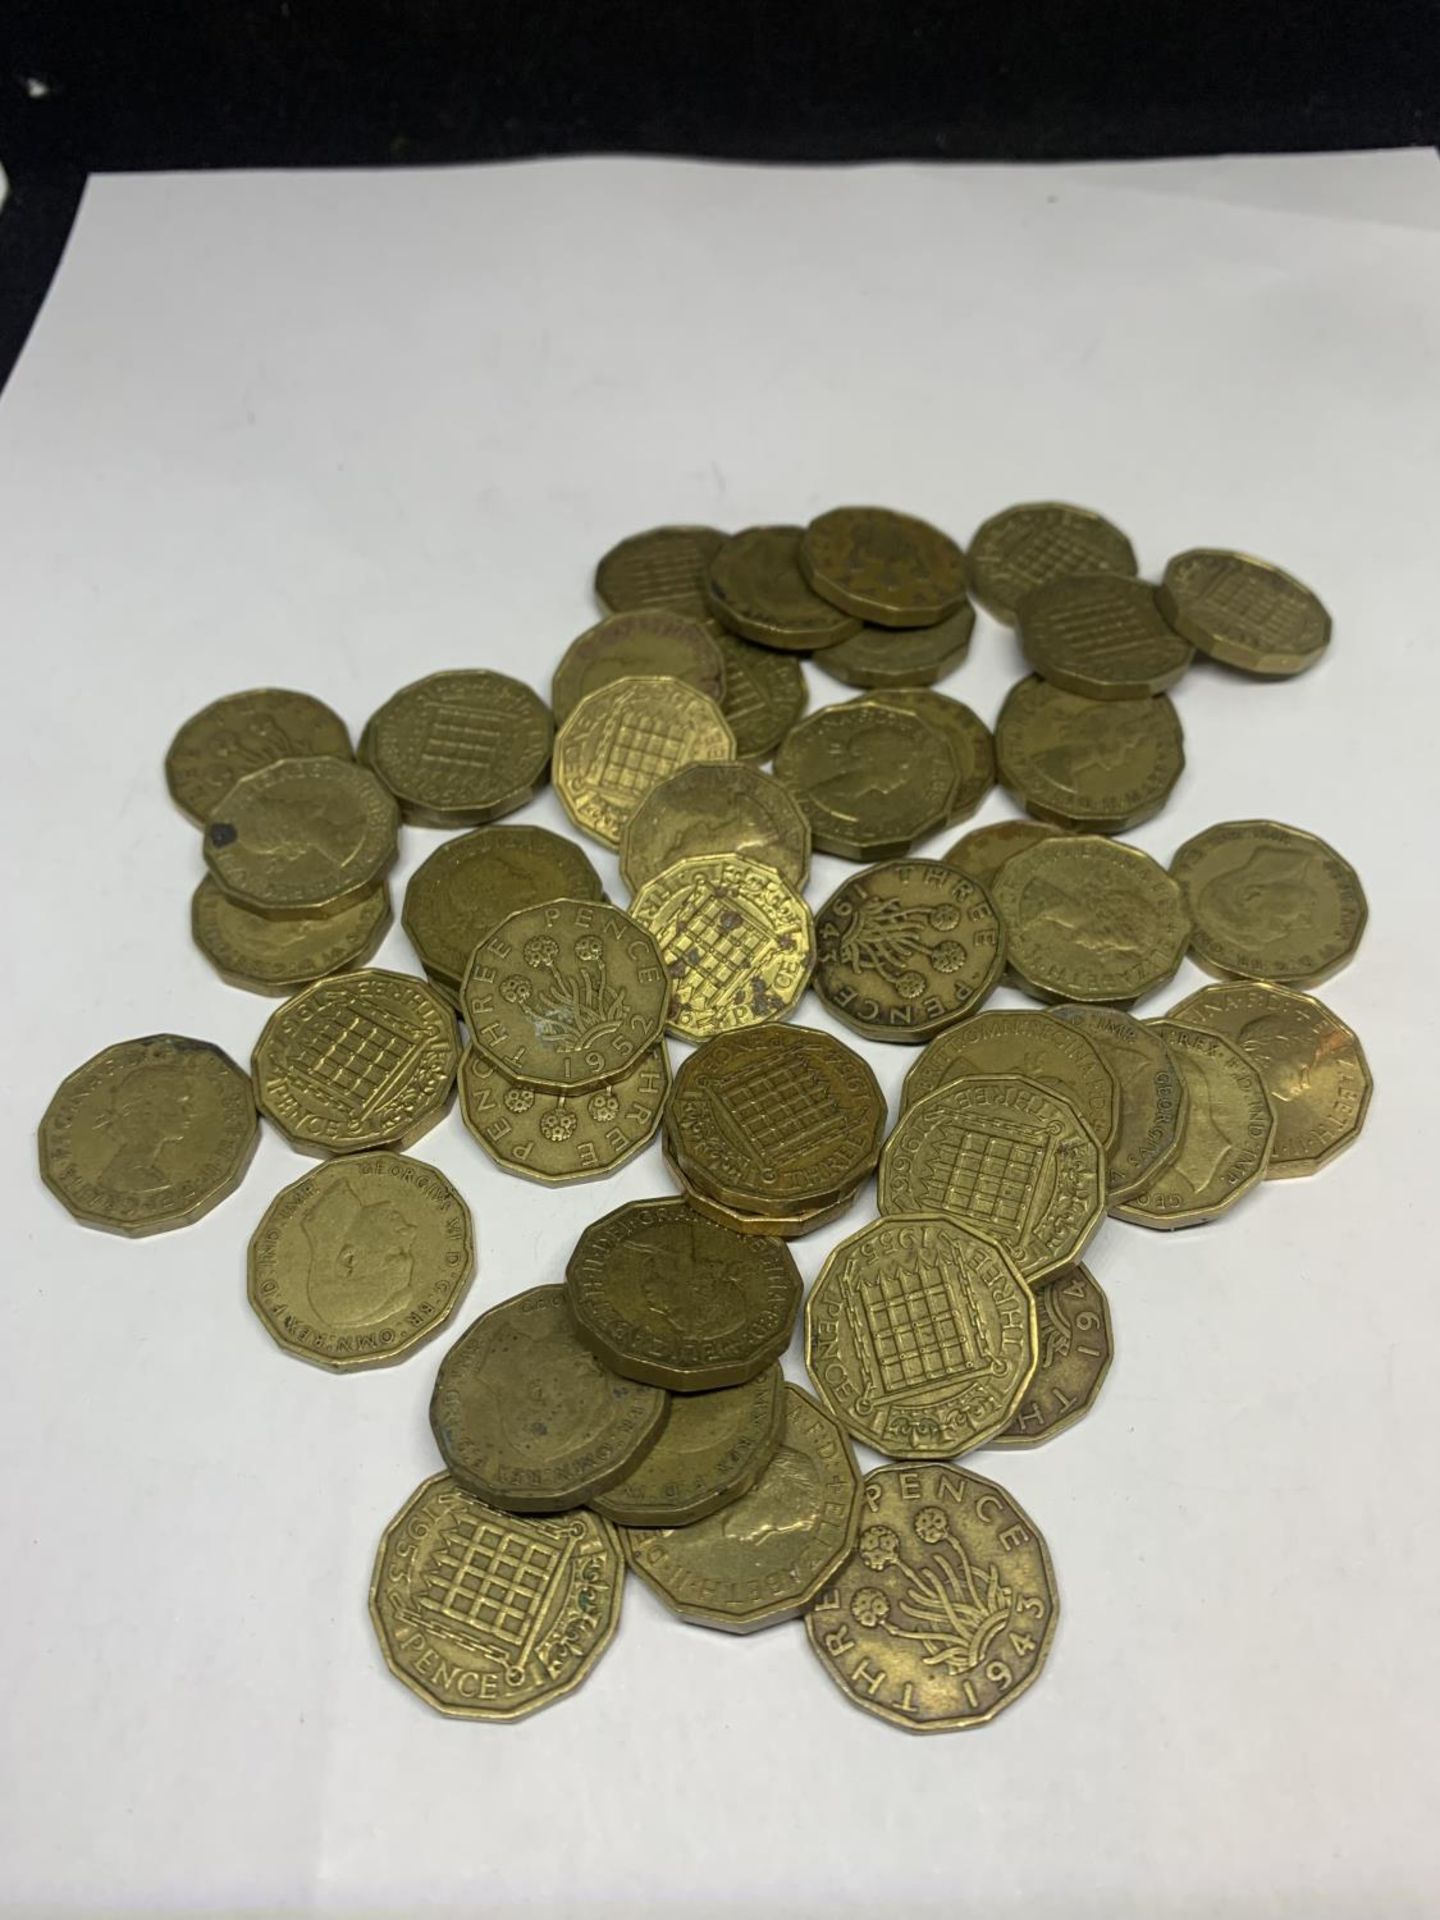 A LARGE QUANTITY OF THREE PENCE PIECES